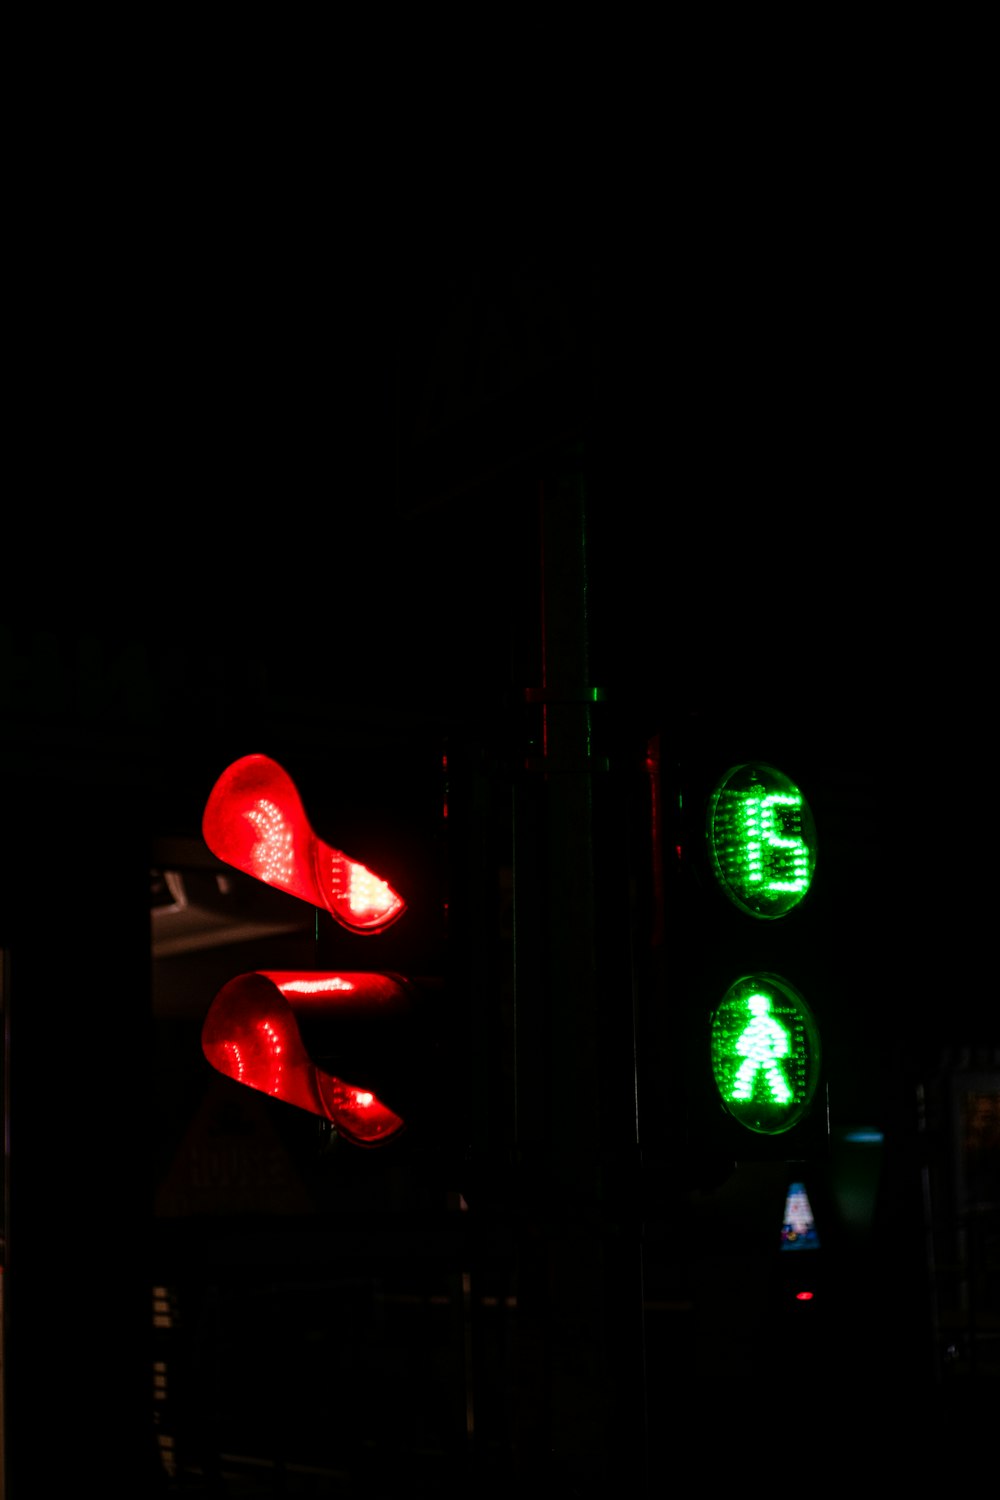 red and green traffic light